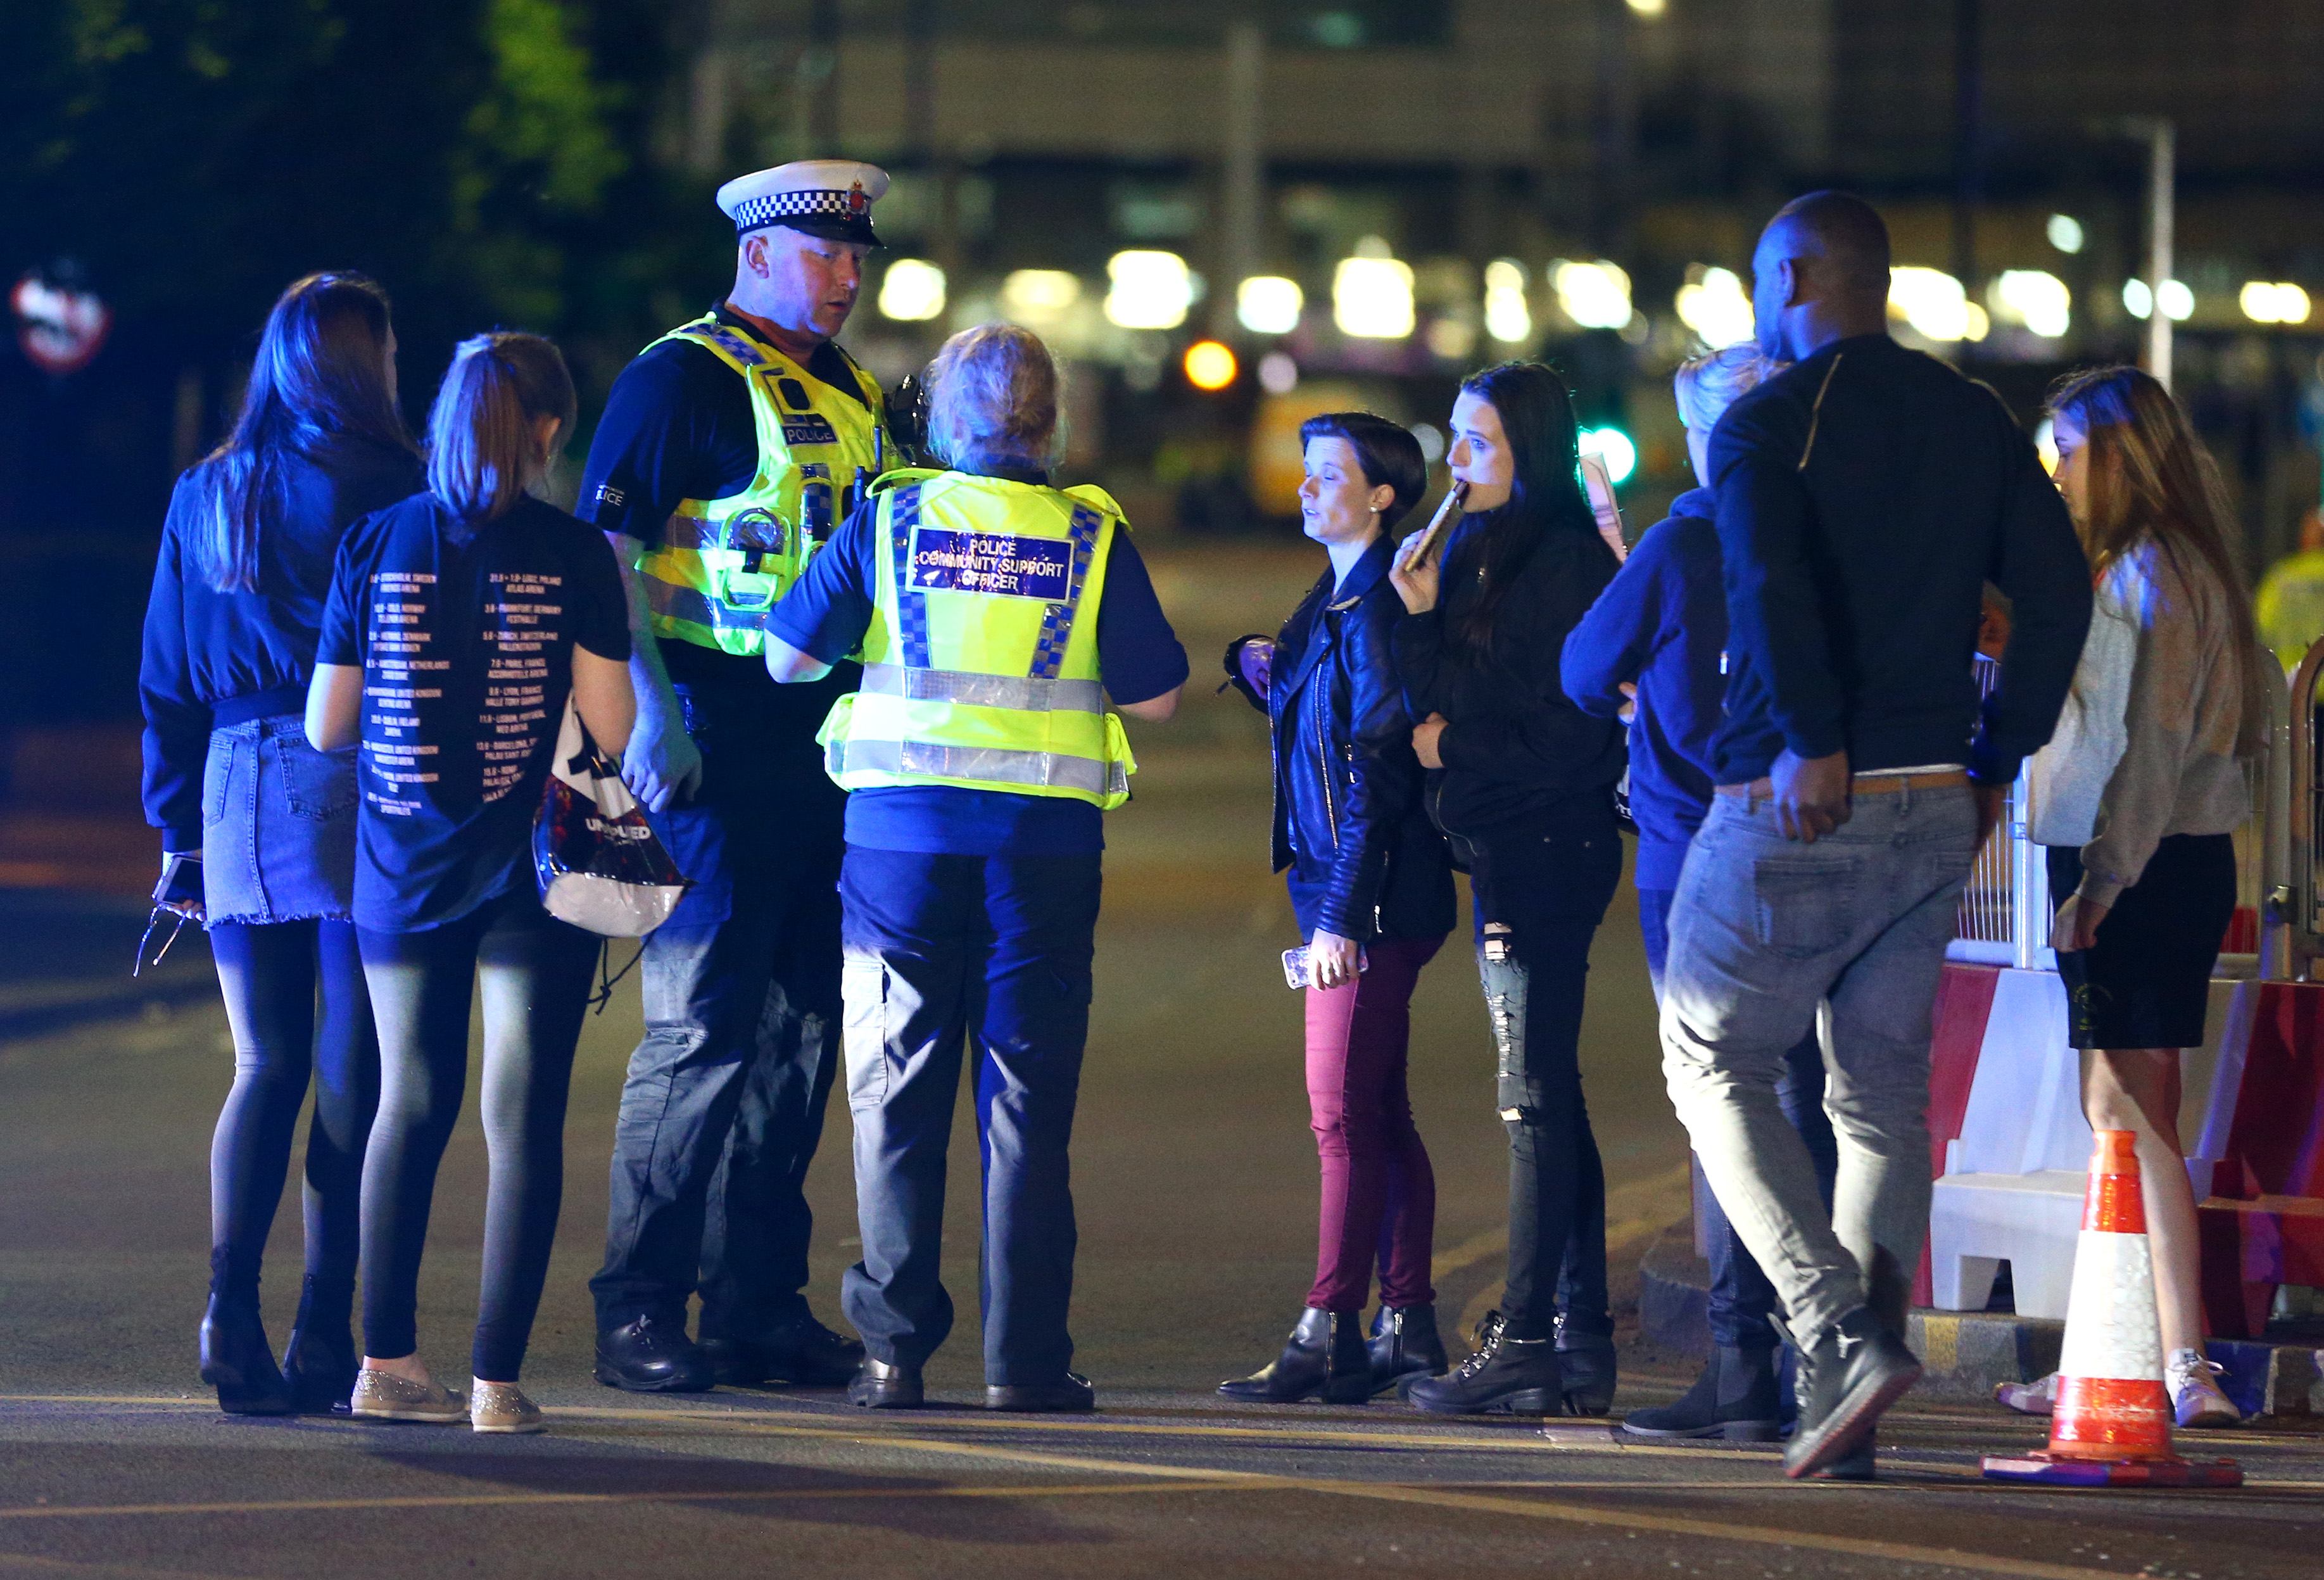 Police Respond To An Incident At Manchester Arena